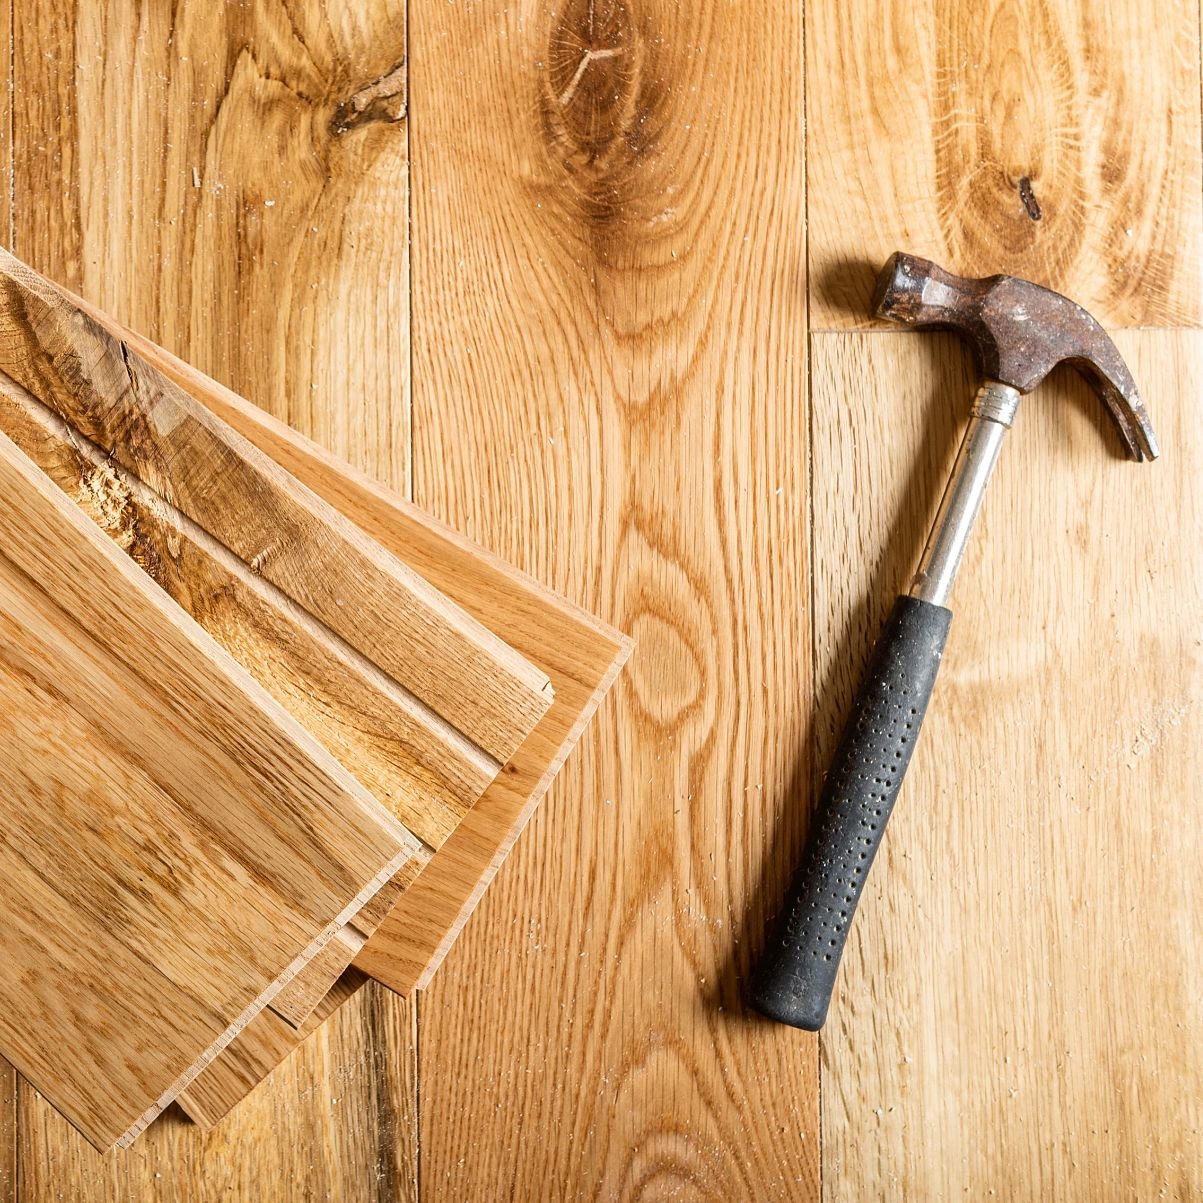 Hammer on hardwood planks - Hardwood flooring installation services from The Carpet Shoppe Inc in Tulare, CA